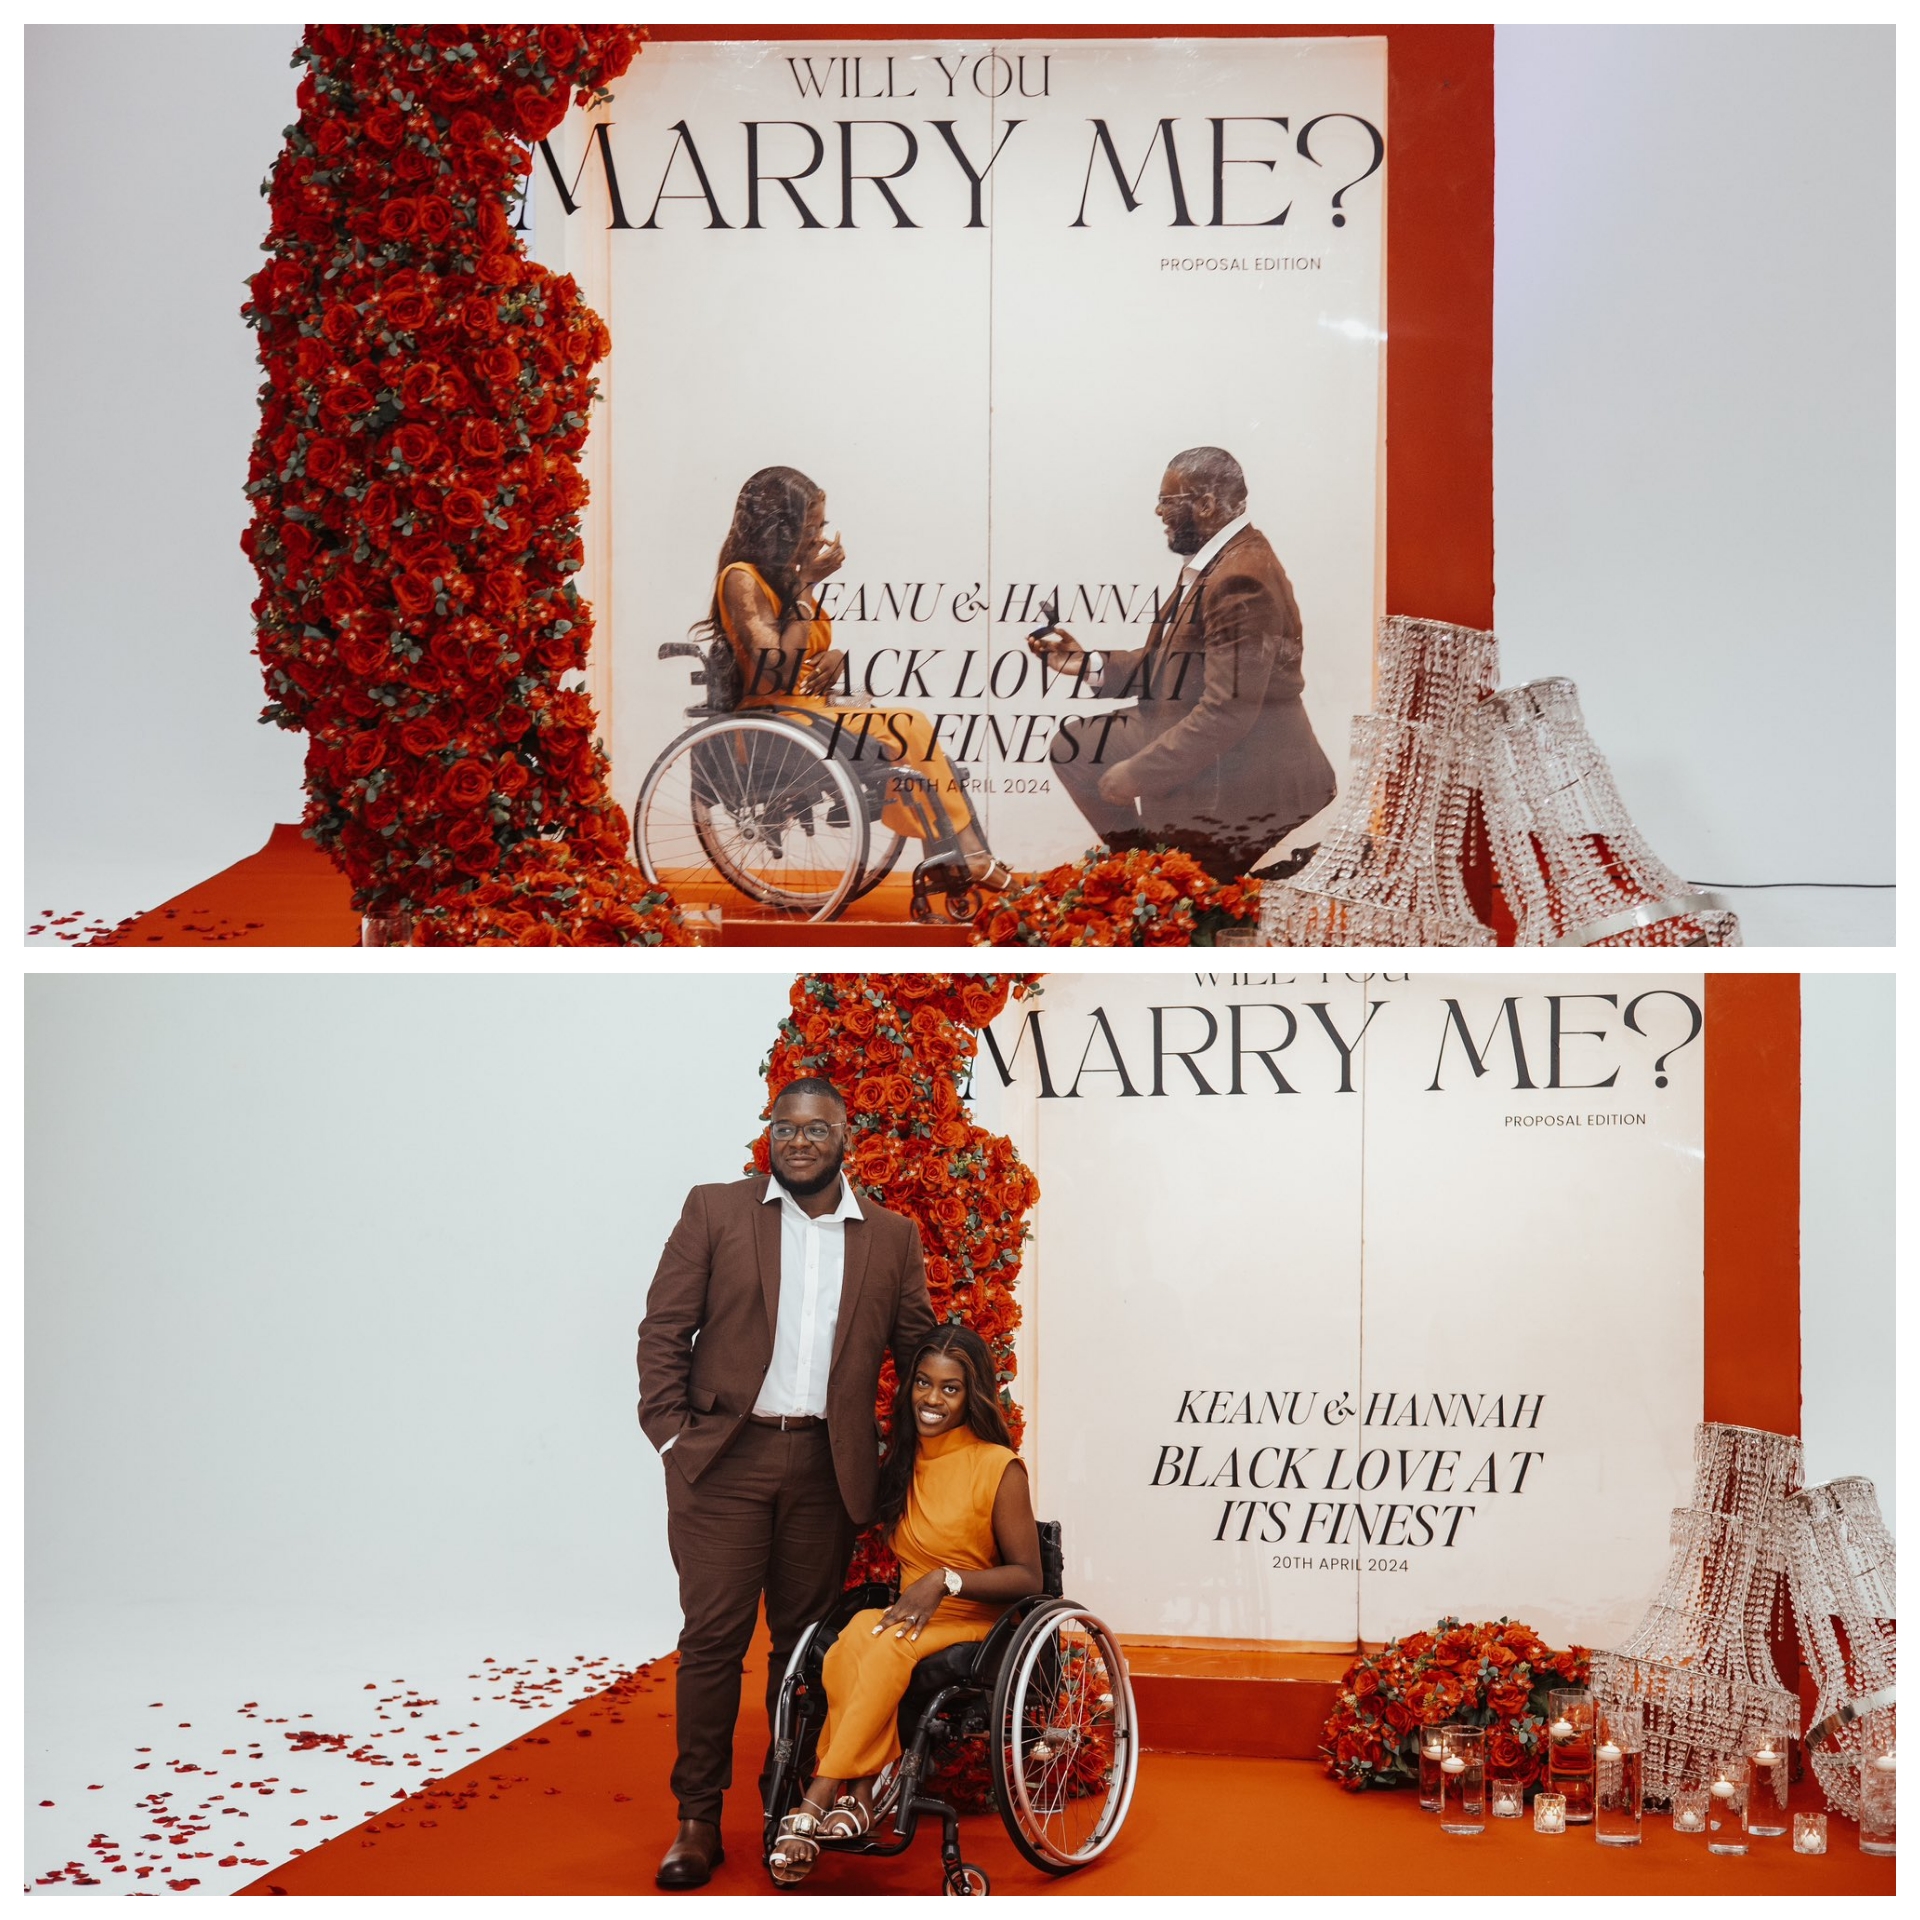 Beautiful moment man kneels to propose to his wheelchair-bound girlfriend